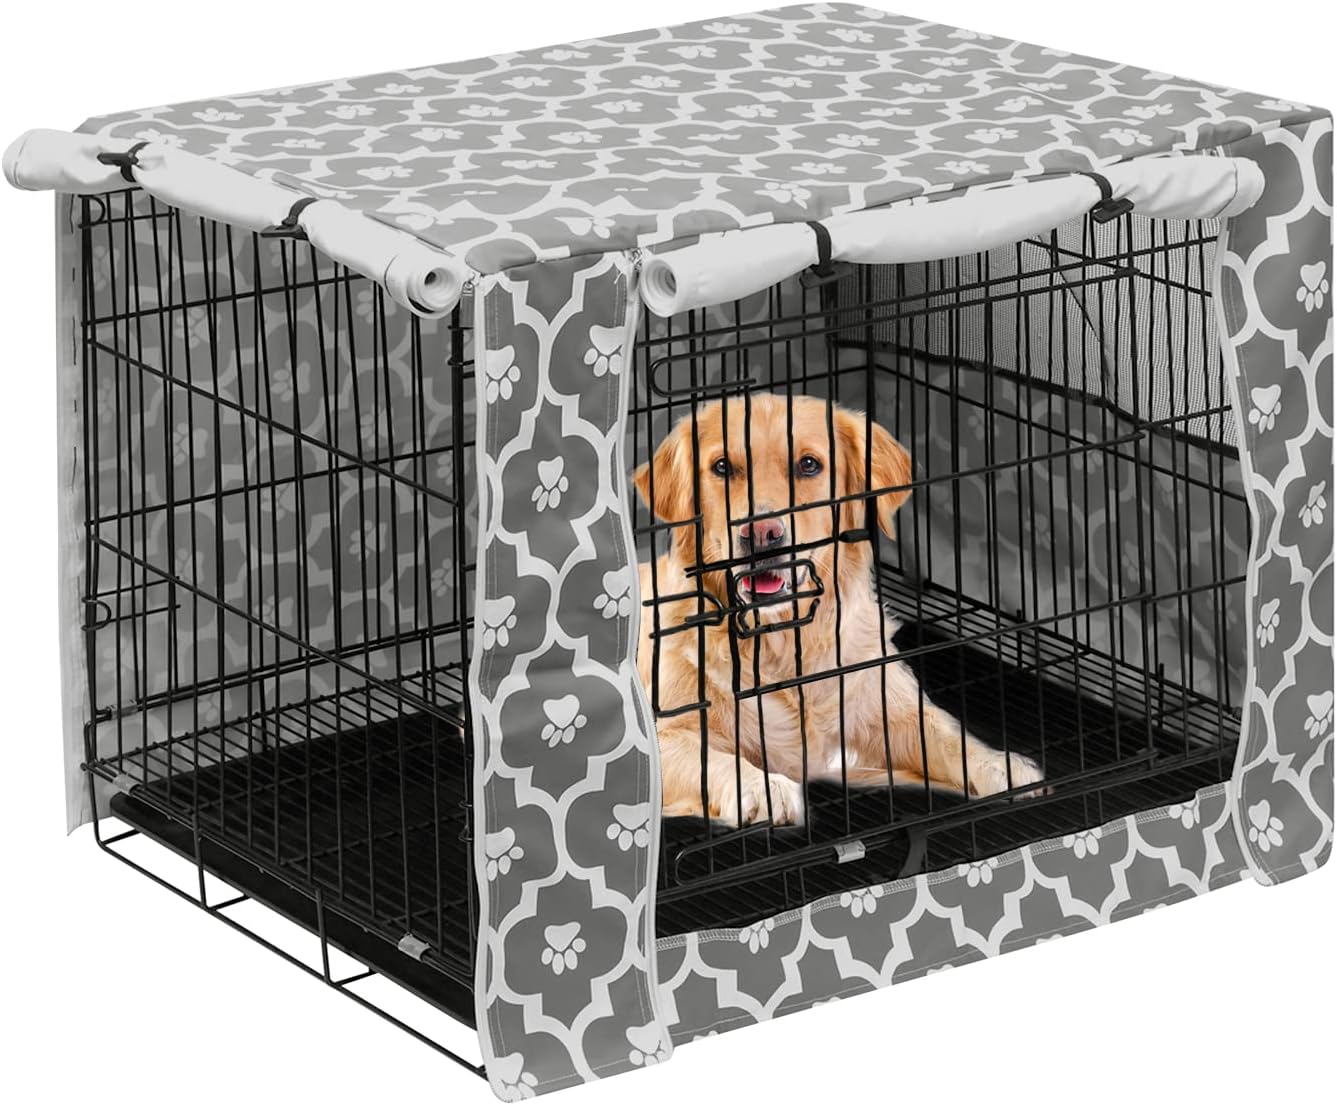 Pethiy Dog Crate Cover Durable Polyester